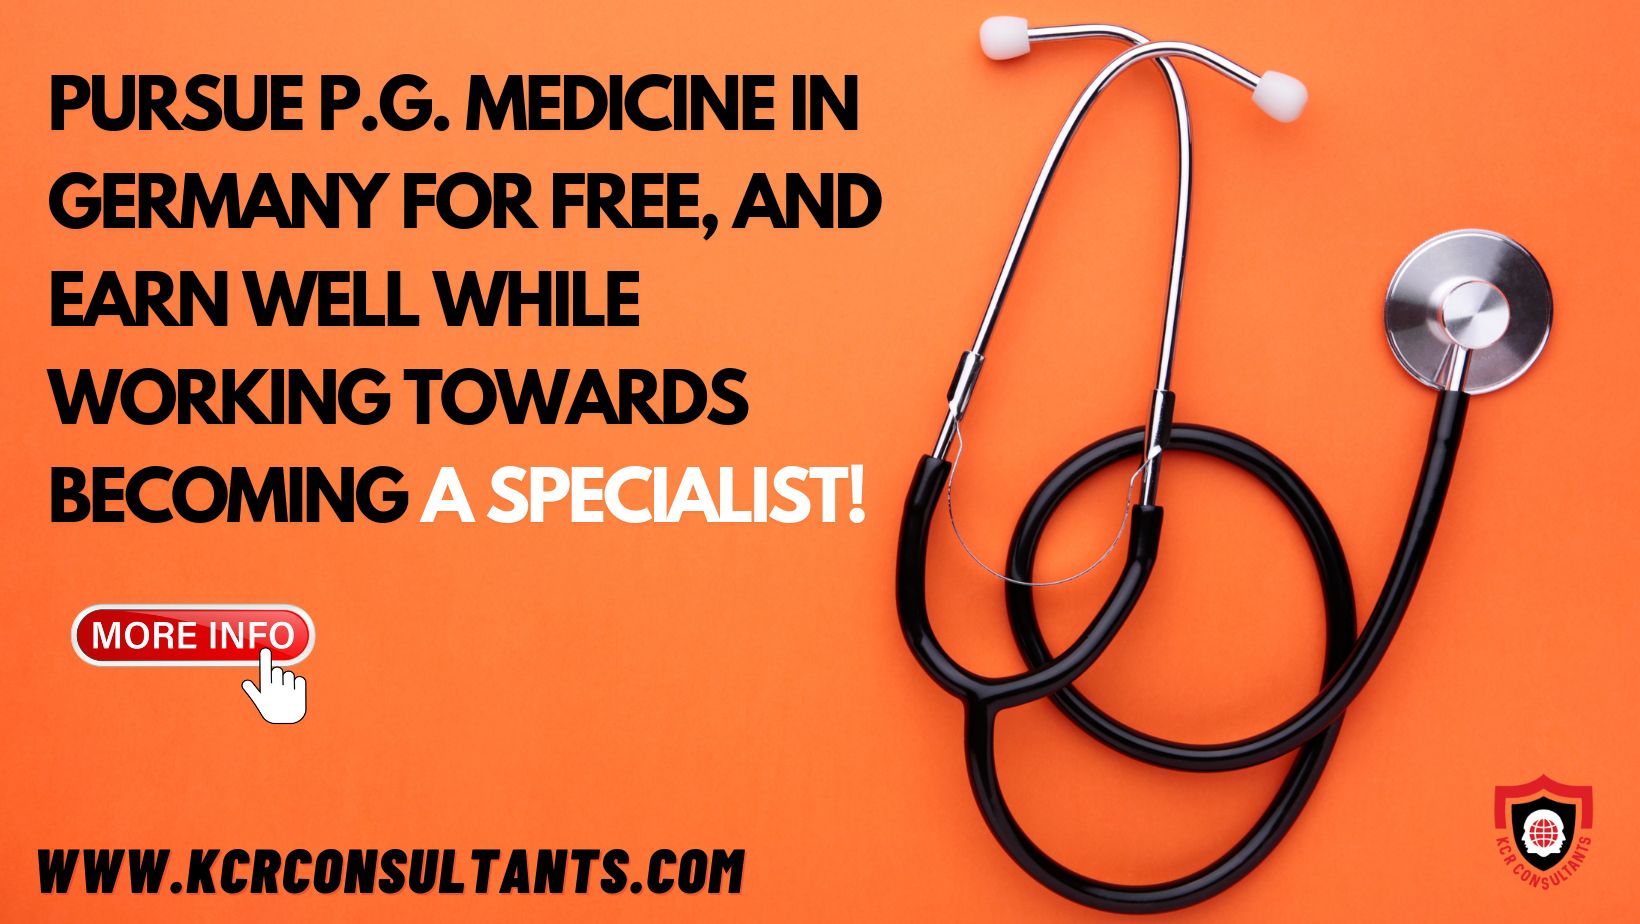 PURSUE P.G. MEDICINE IN GERMANY FOR FREE, AND EARN WELL WHILE WORKING TOWARDS BECOMING A SPECIALIST!